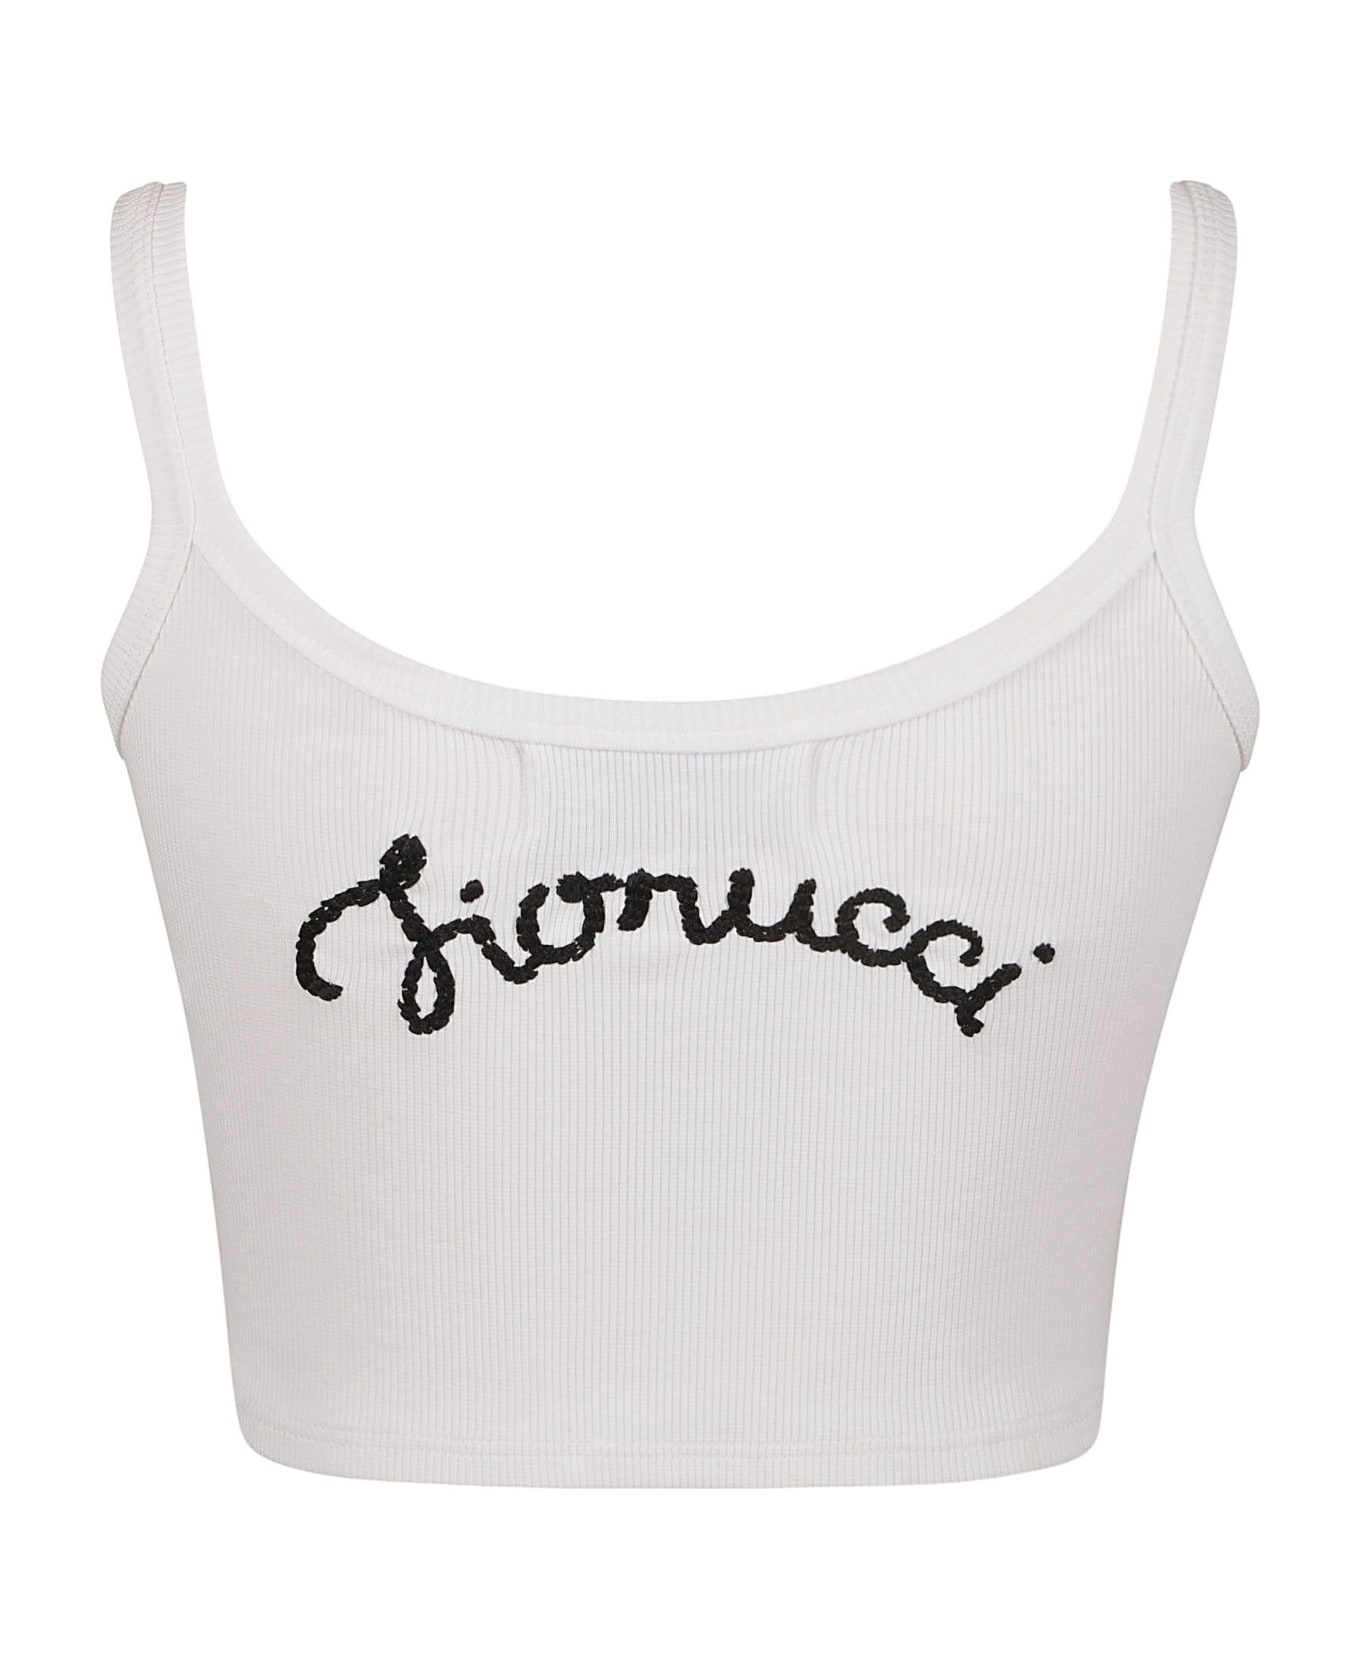 Fiorucci Embroidered Cropped Tank Top - White